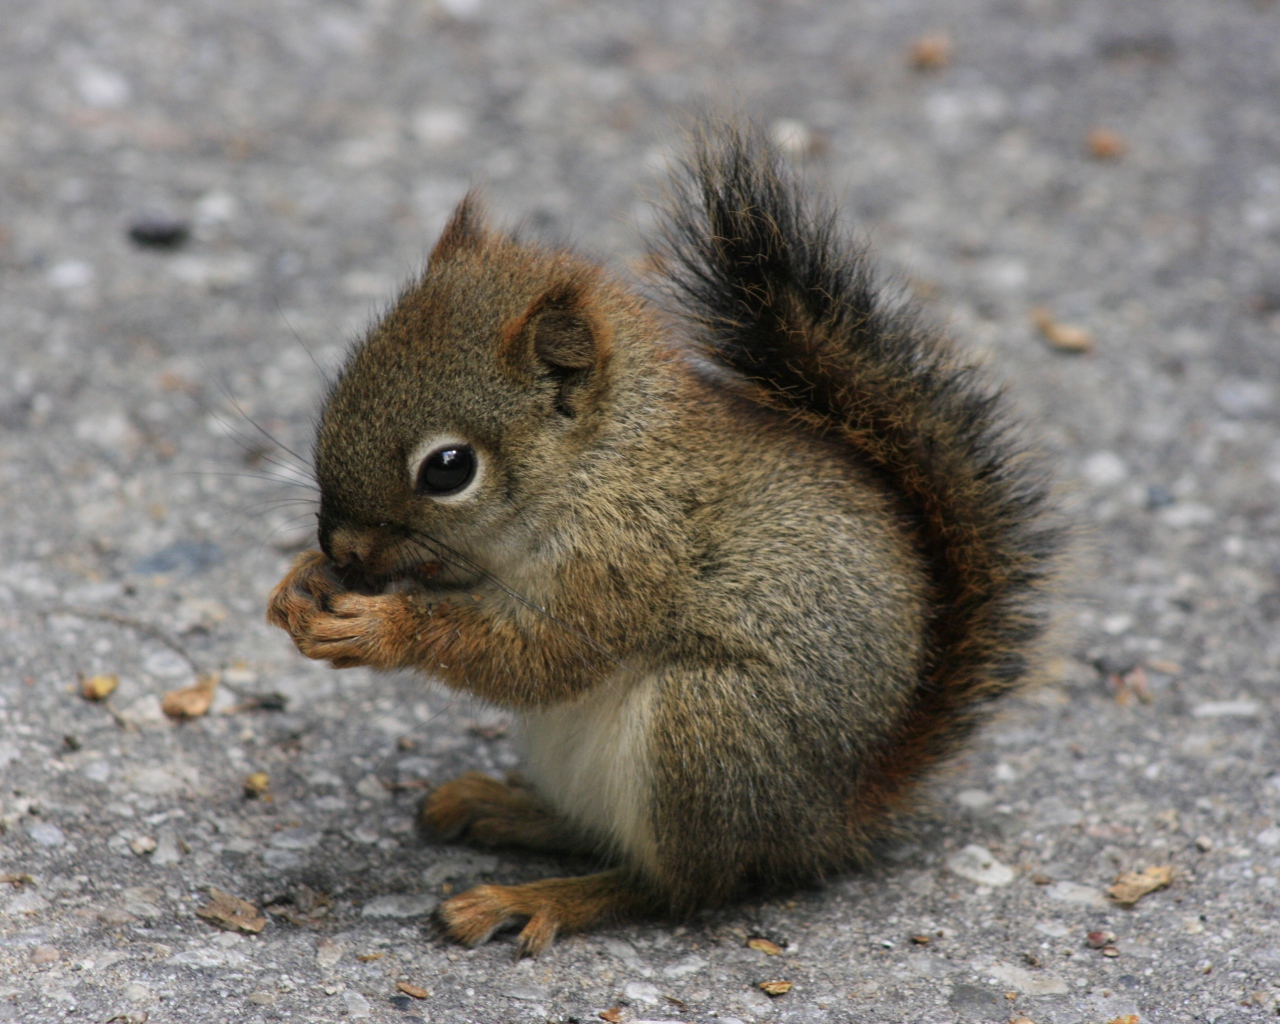 Little squirrel holding food in paws